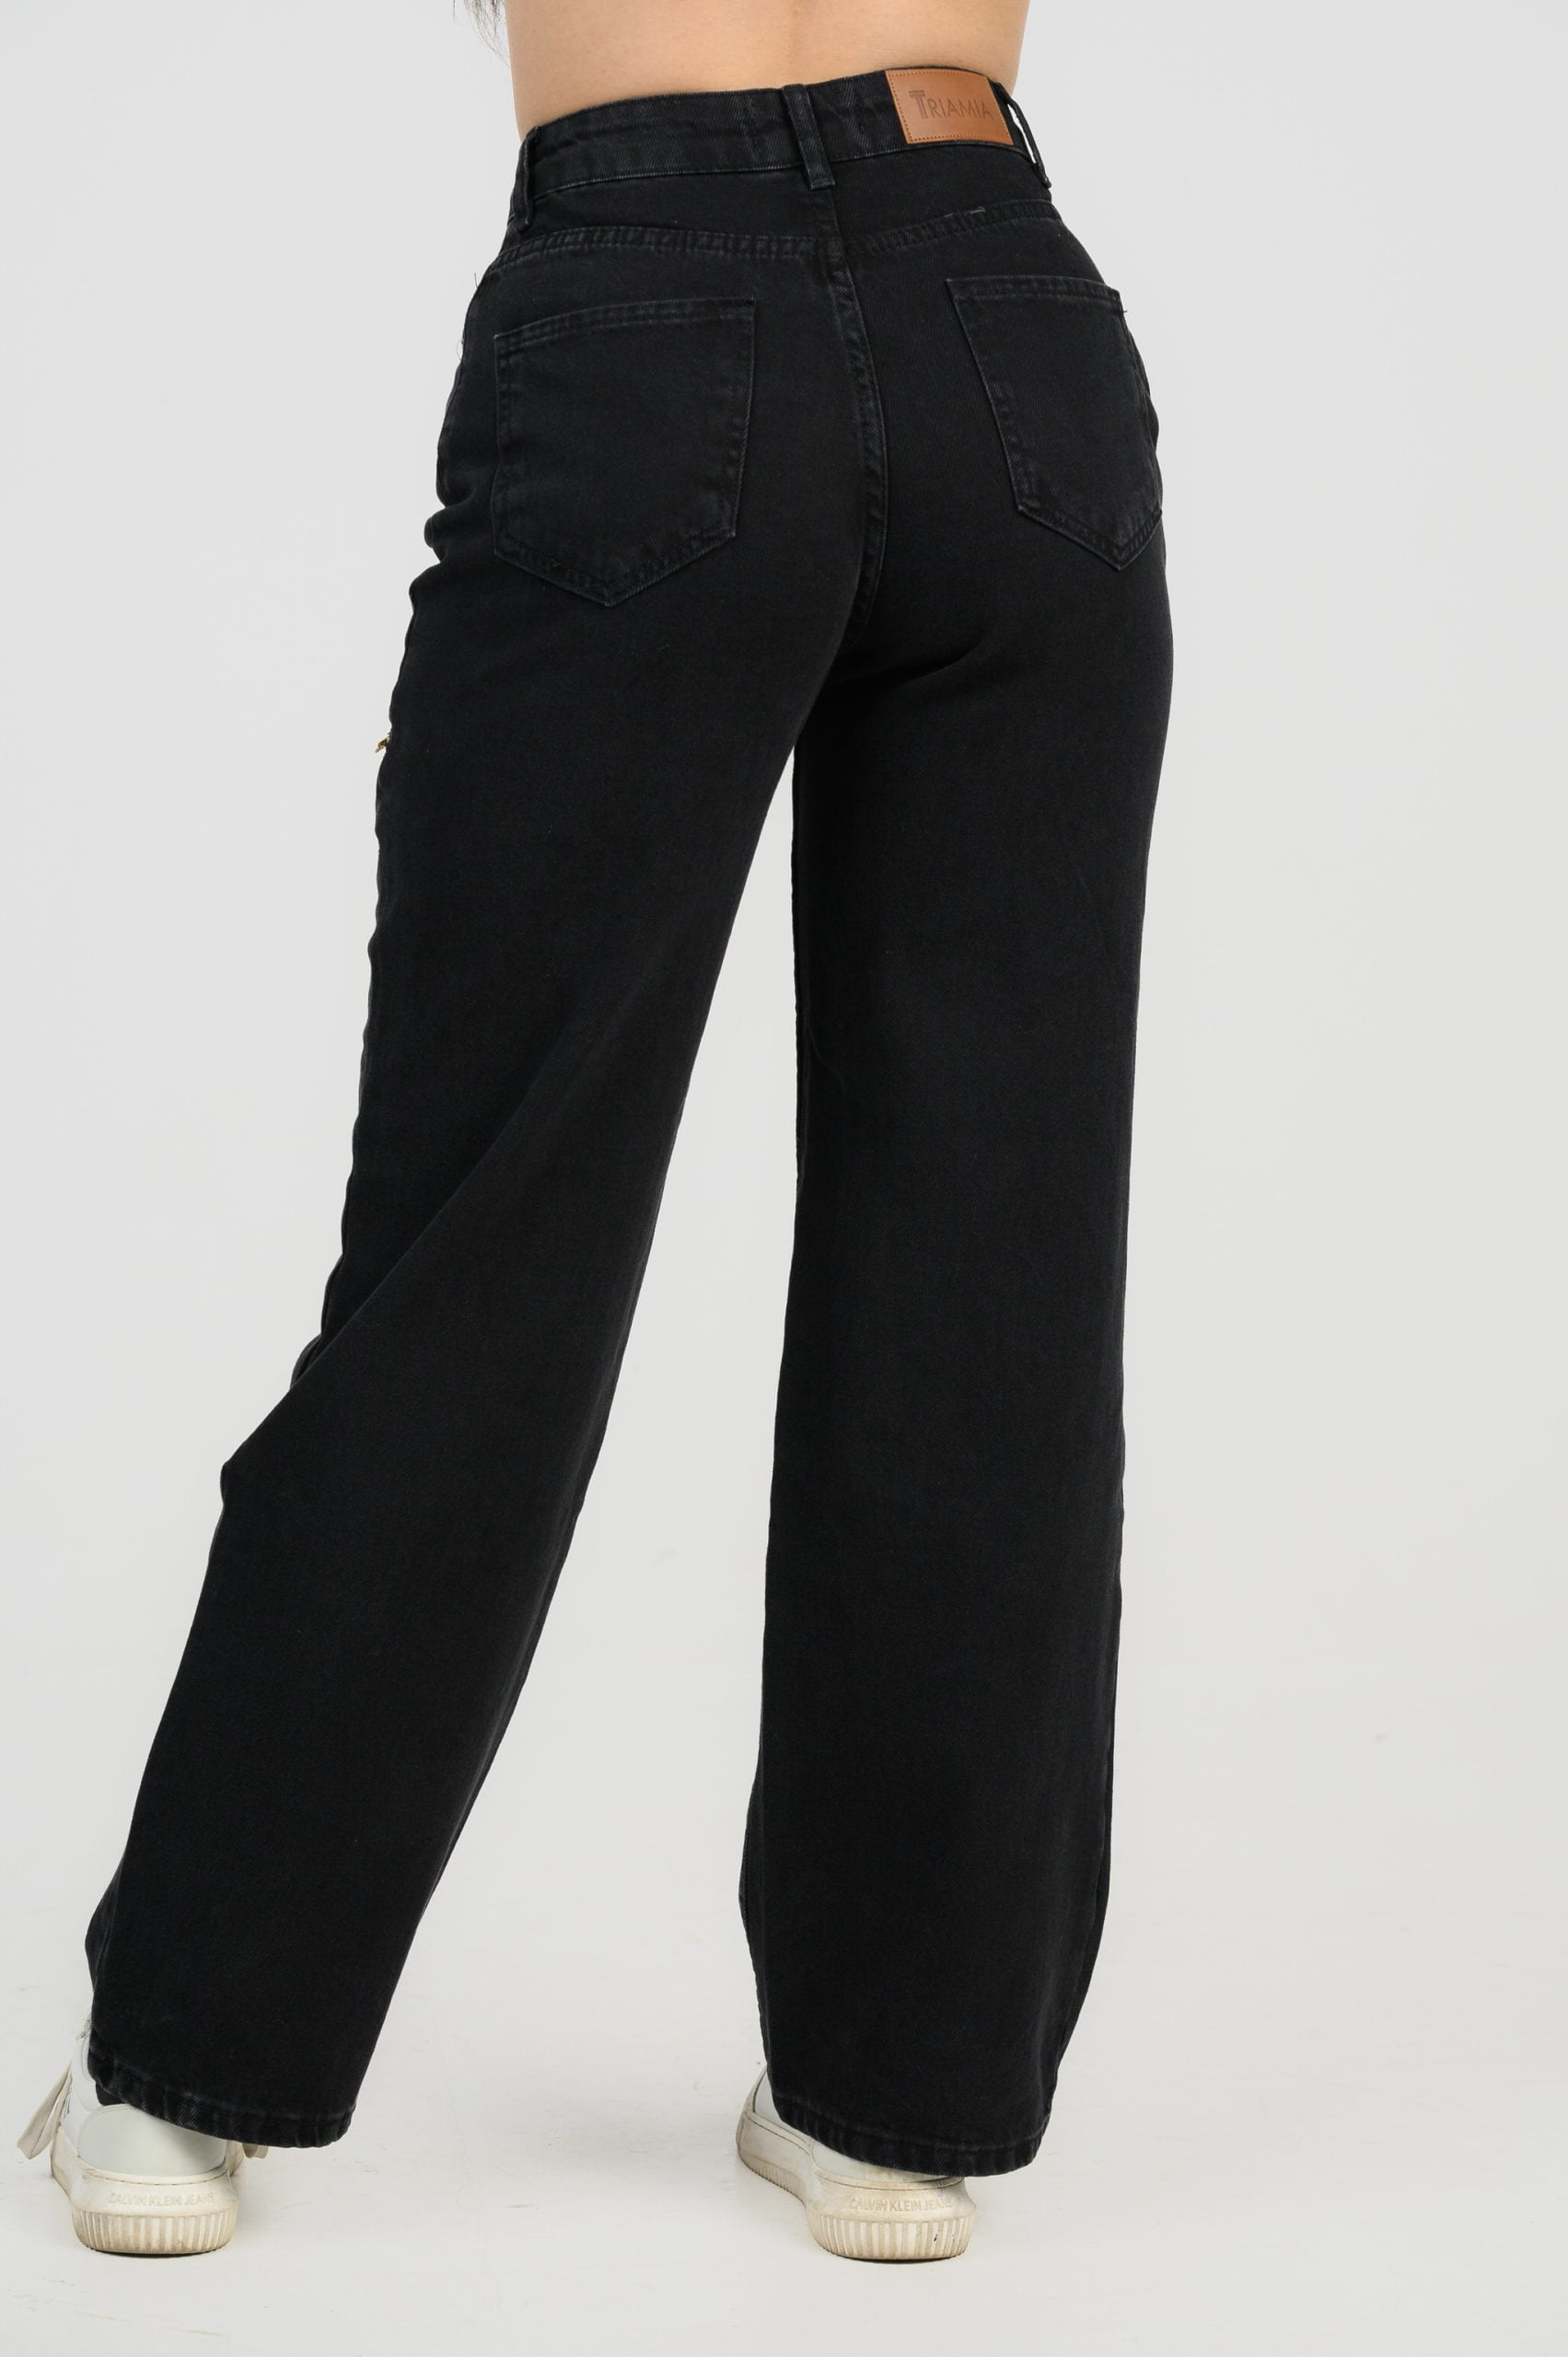 black jeans with zippers on thighs back side